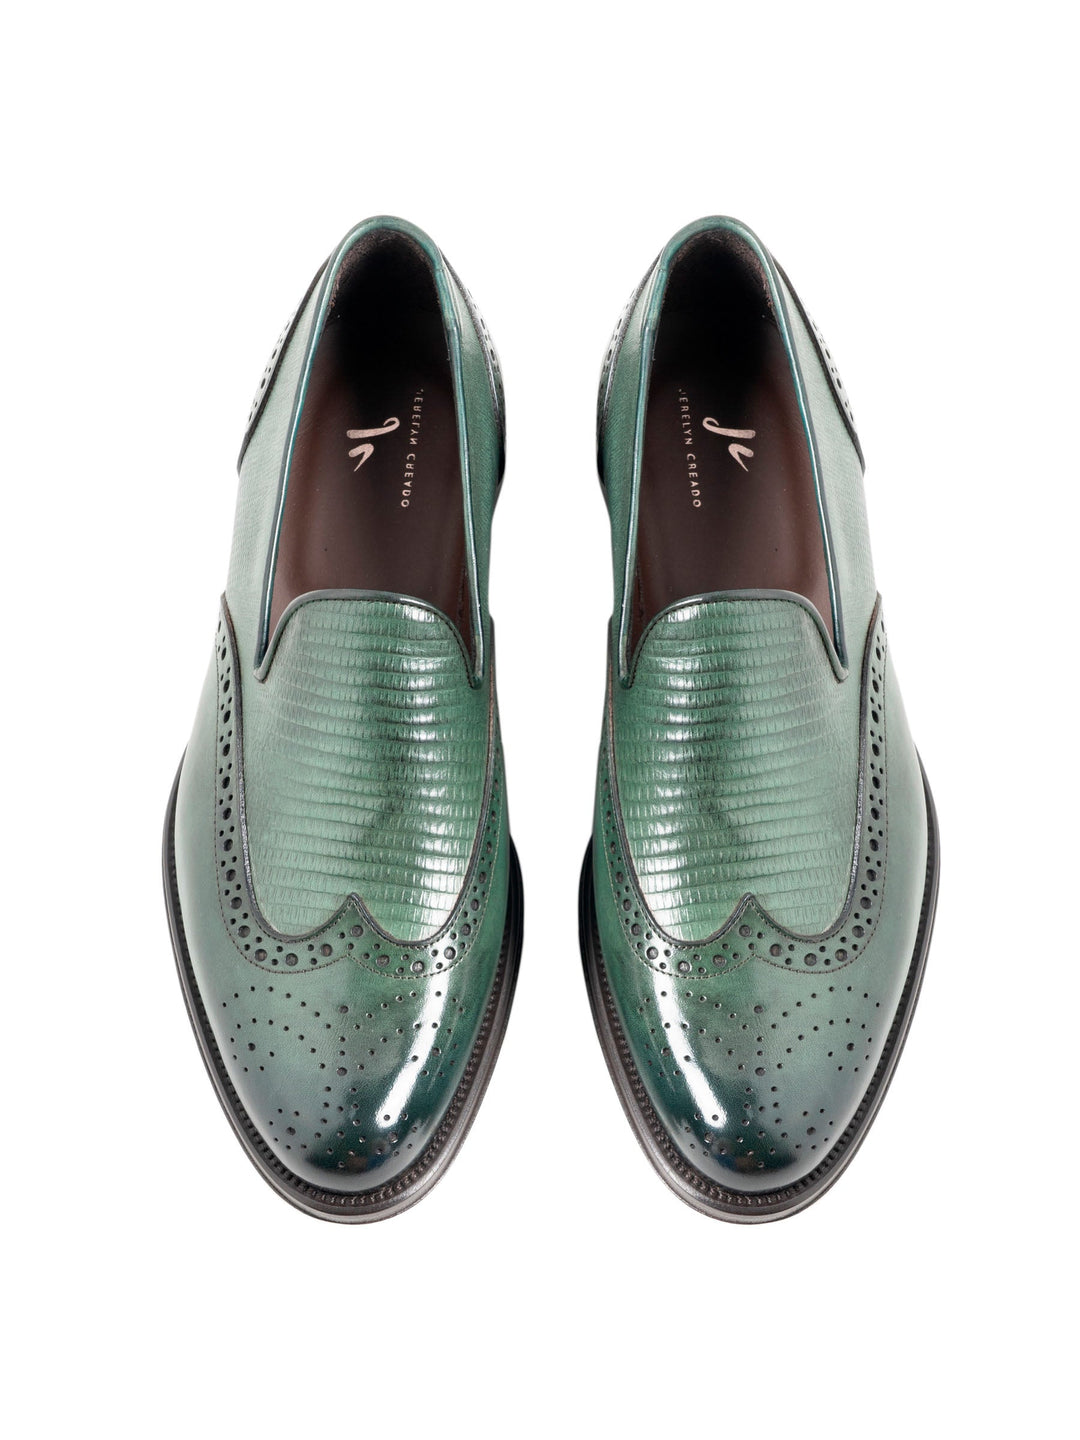 Green leather men's loafers with perforated details, top view